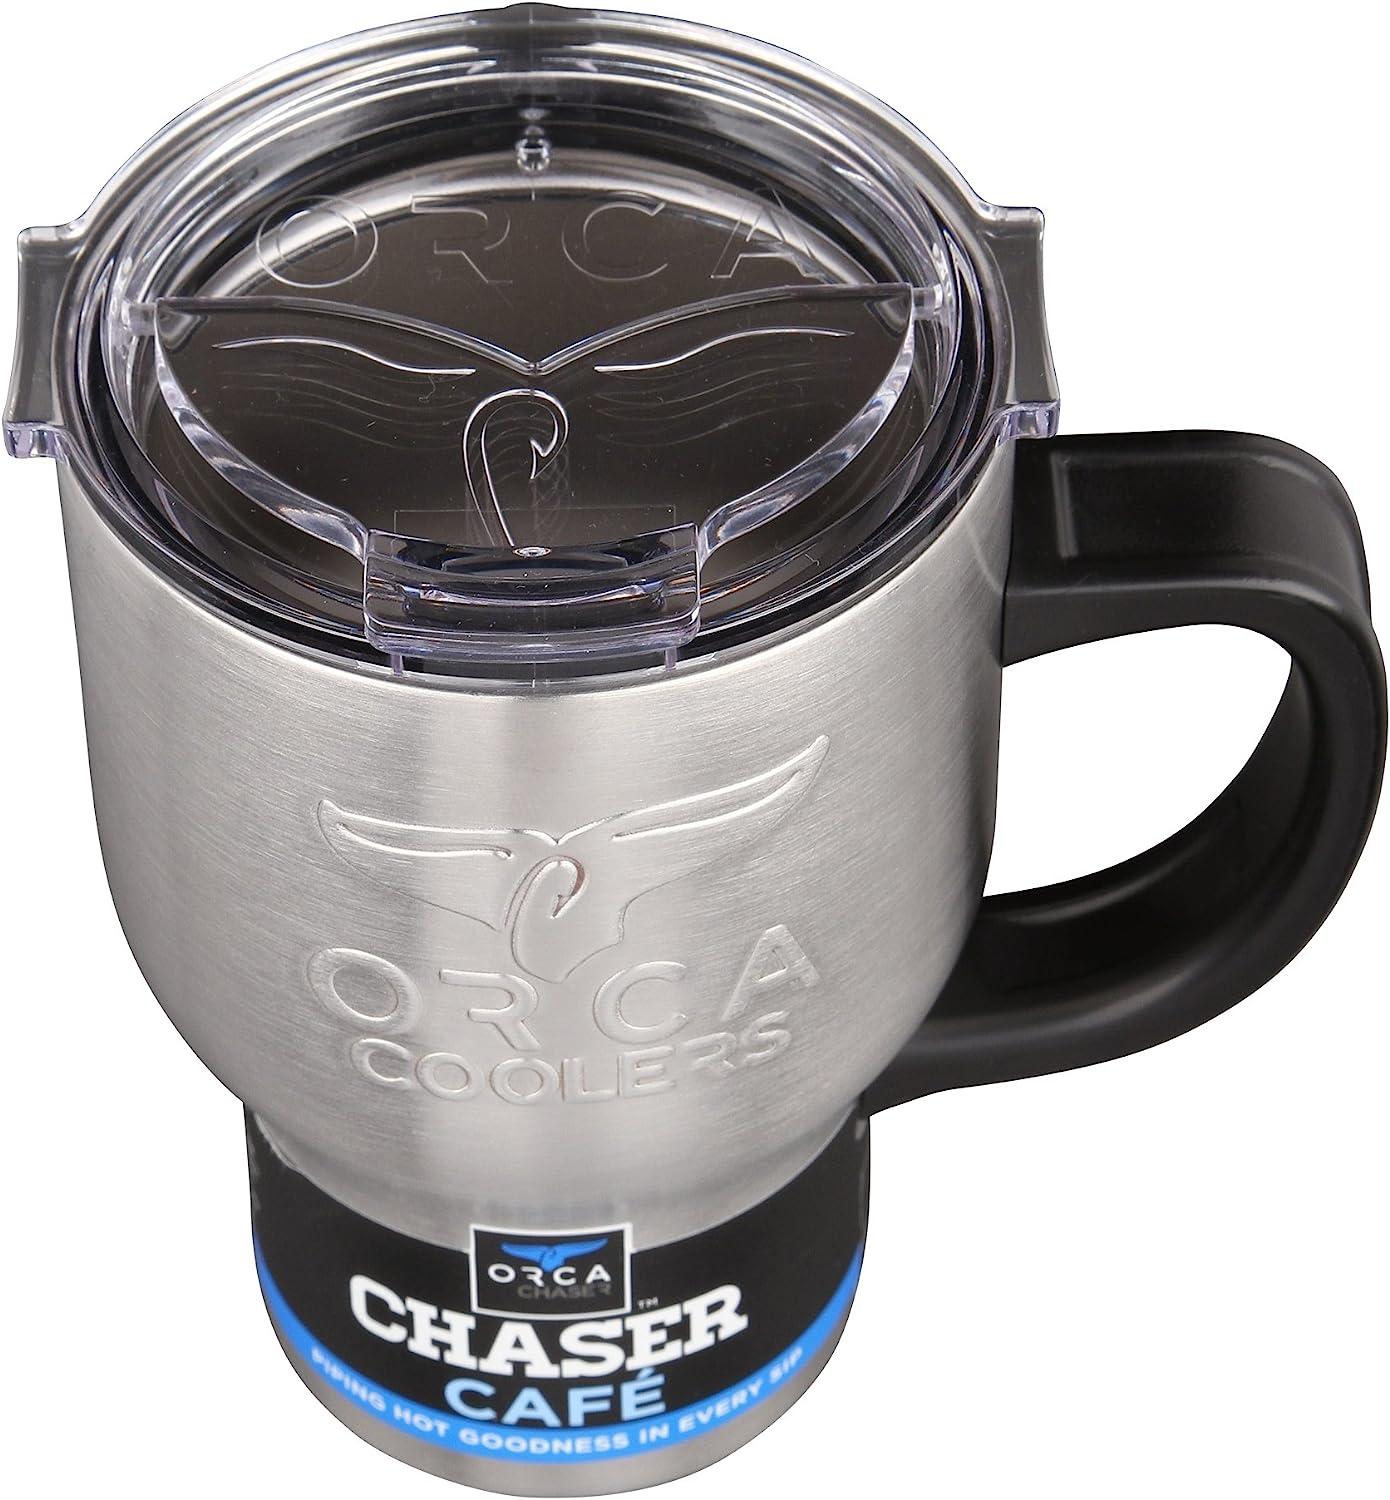 ORCA Chasertini 8 oz Silver BPA Free Insulated Cup